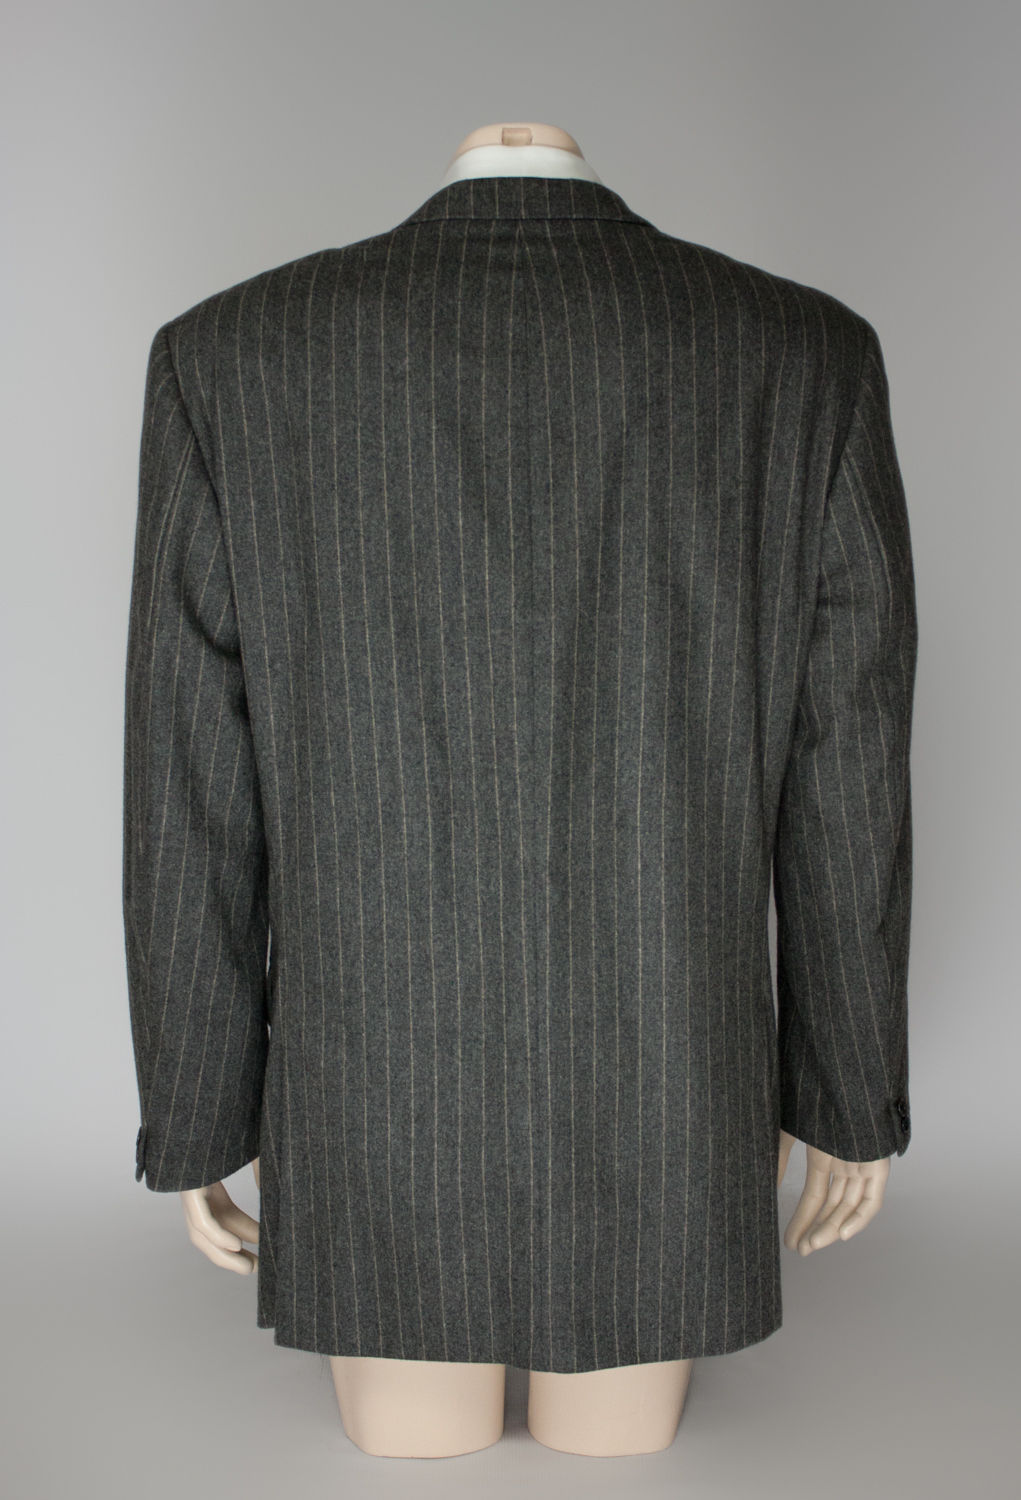 HUGO BOSS Wool-Cashmere 3 Button Blazer SIZE US 42L, EUR 102 - secondfirst